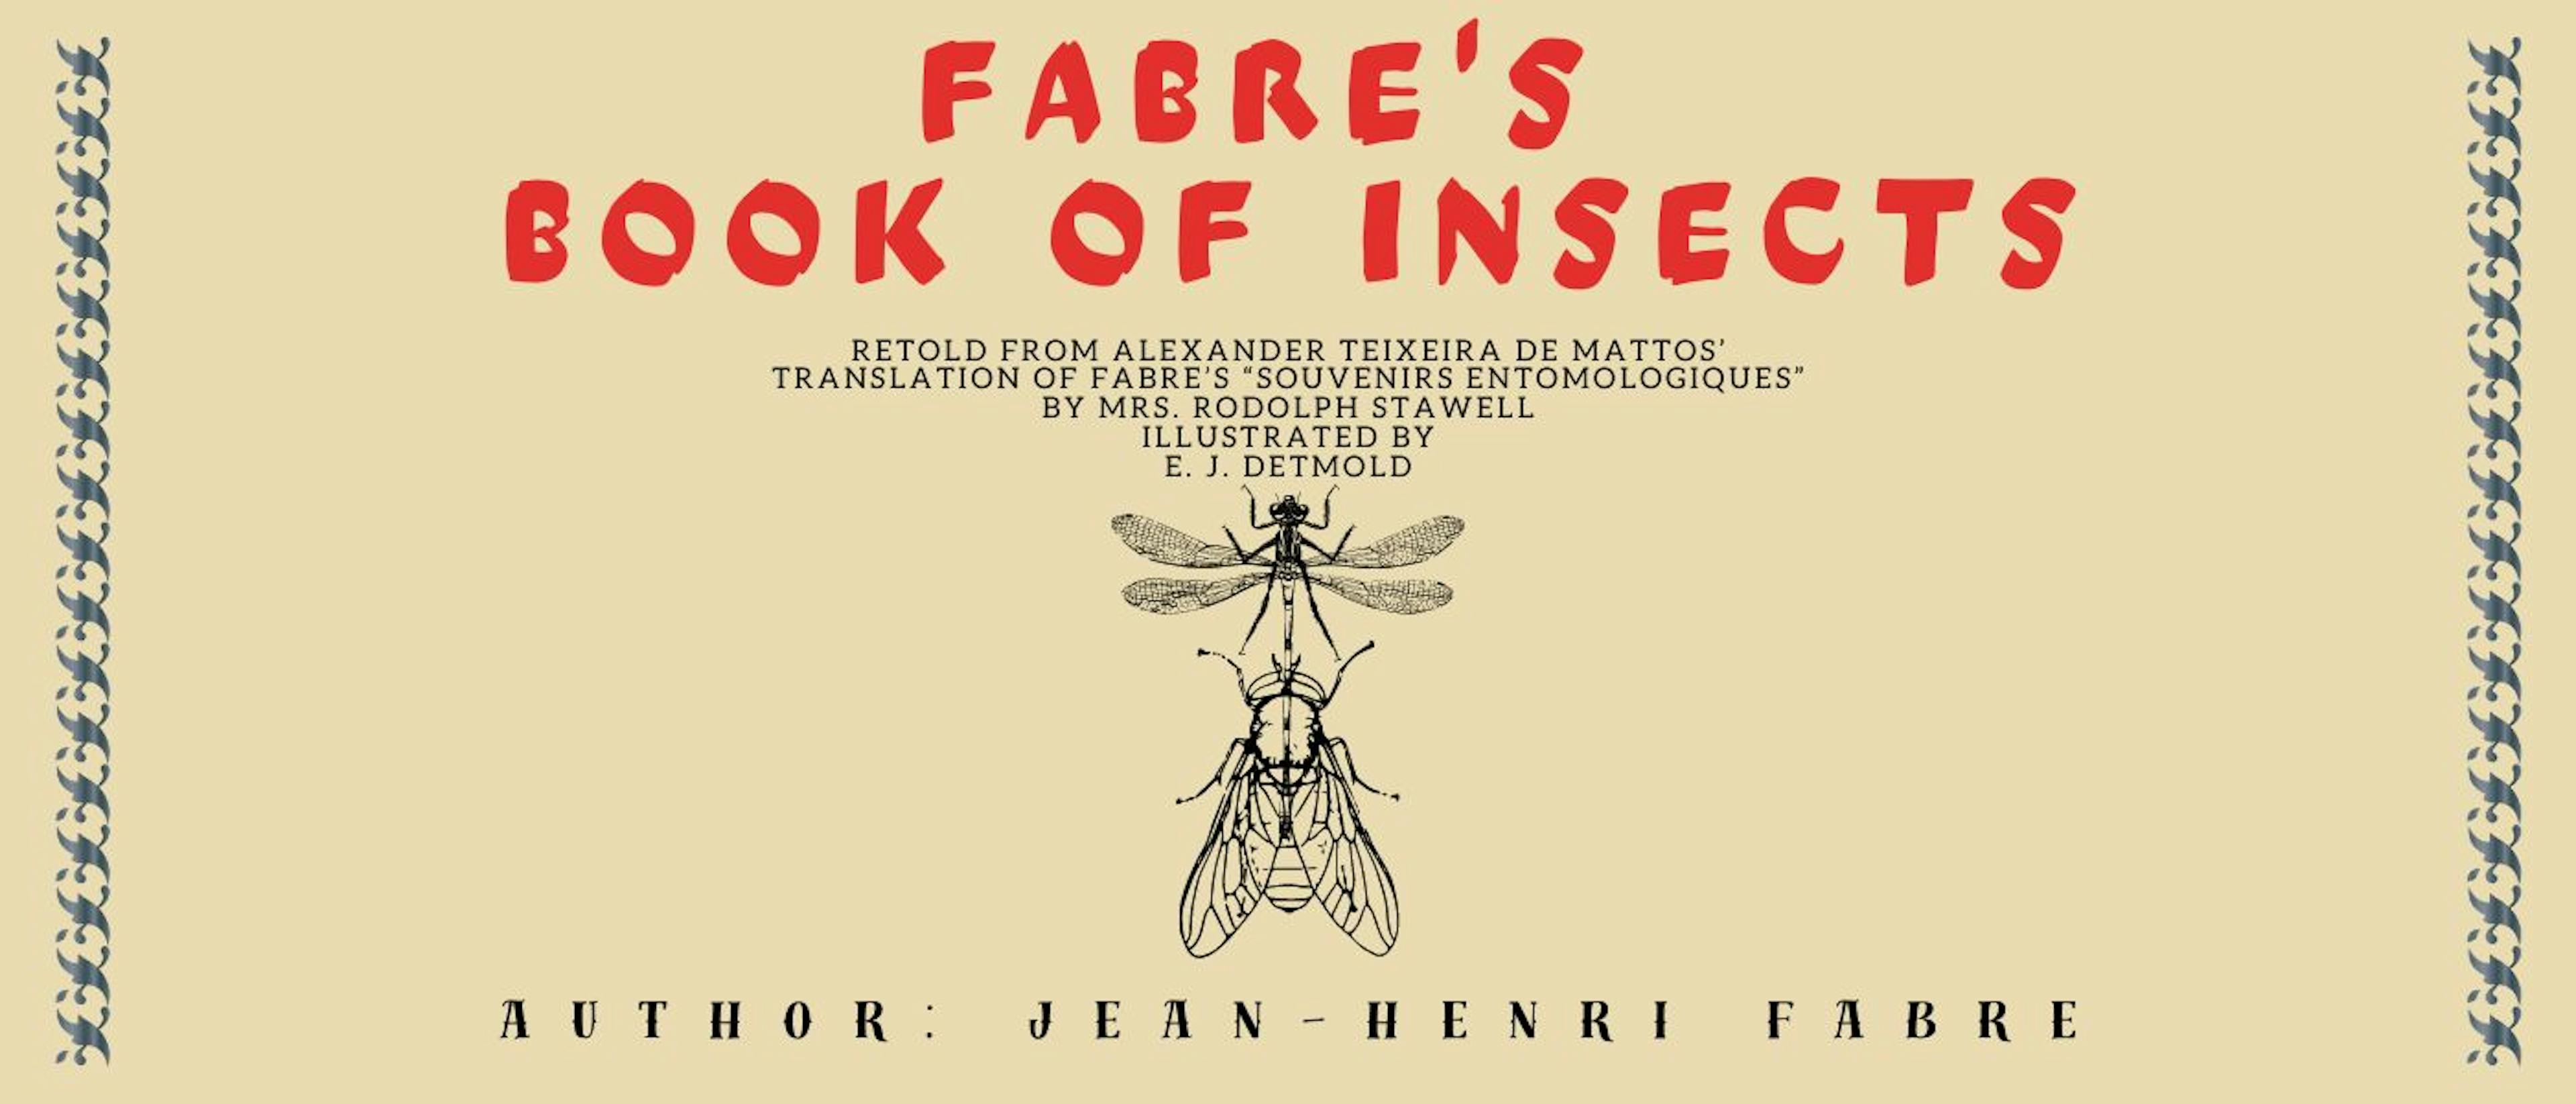 featured image - Fabre's Book of Insects by Jean-Henri Fabre - Table of Links